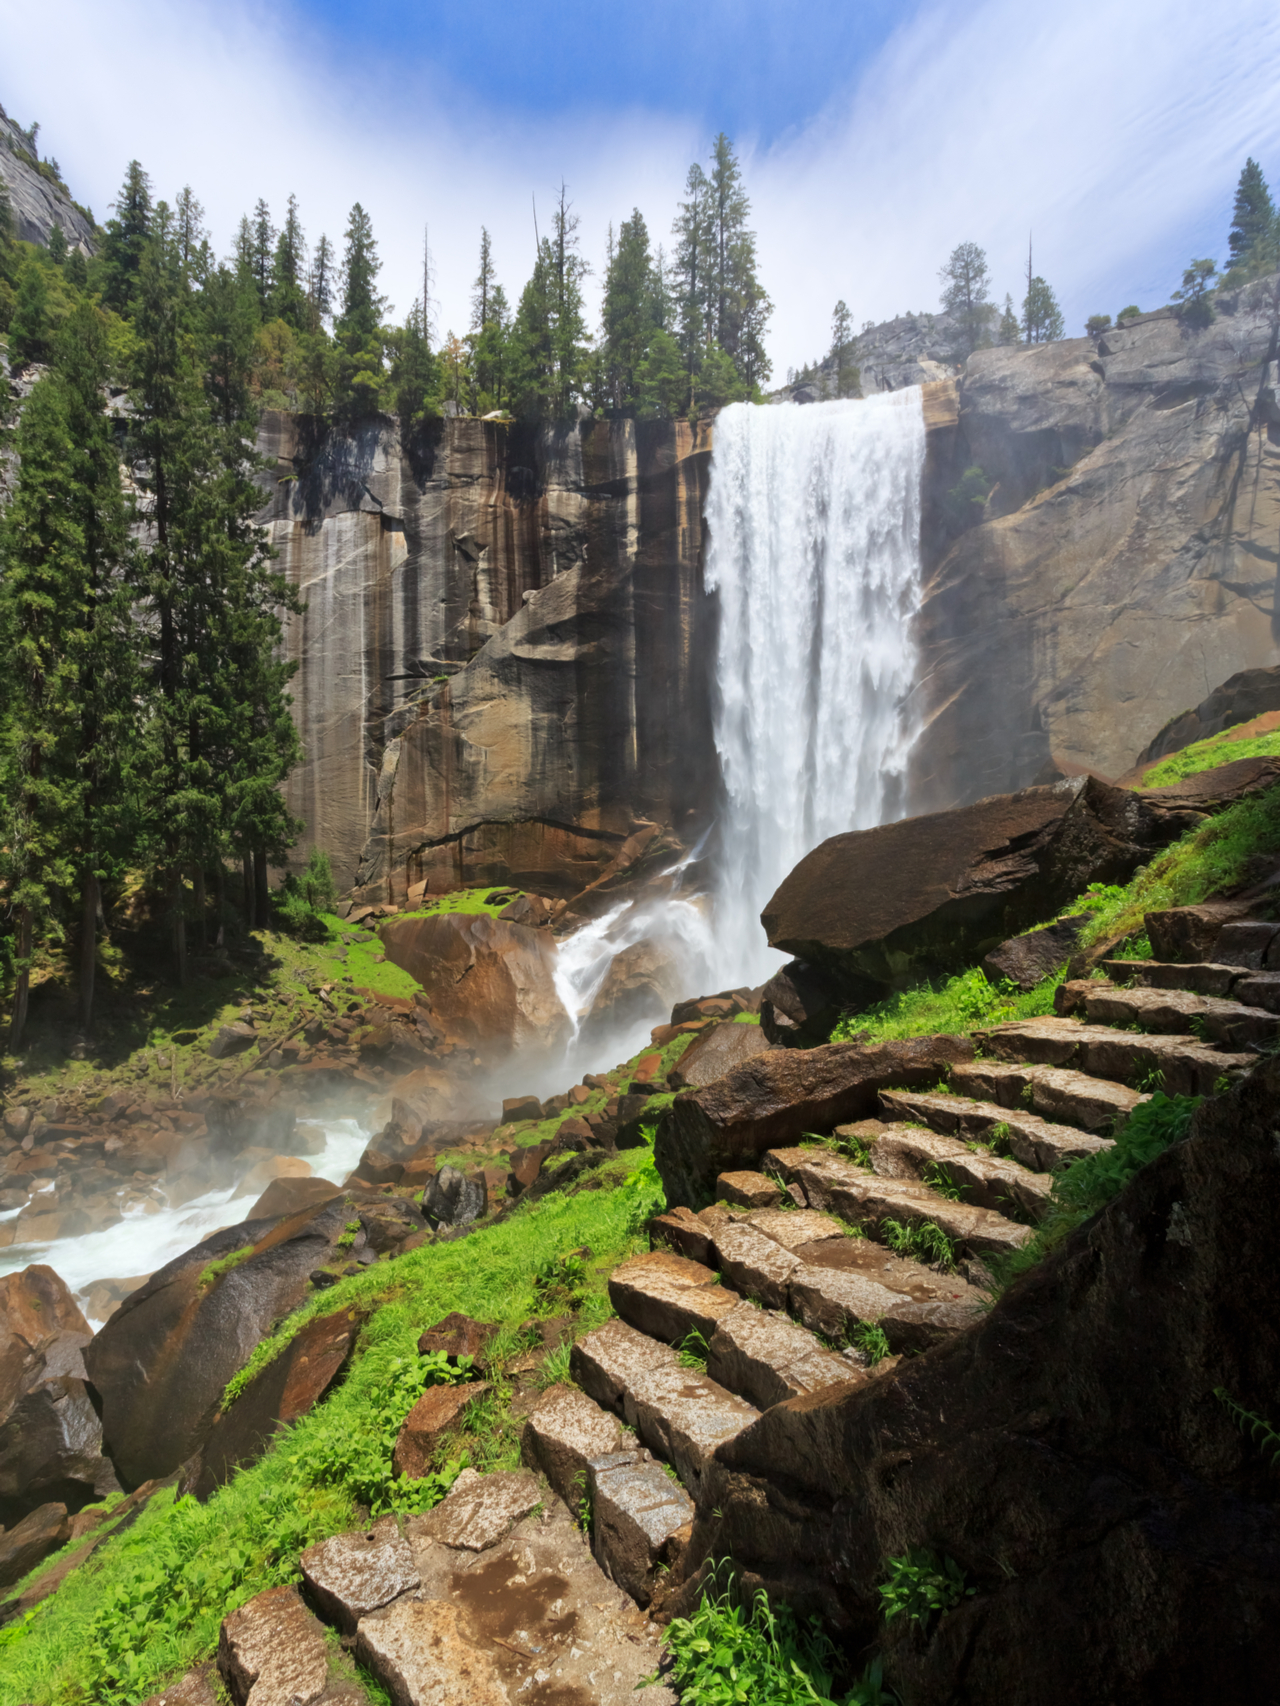 Vernal Fall in Yosemite, one of America's best national parks